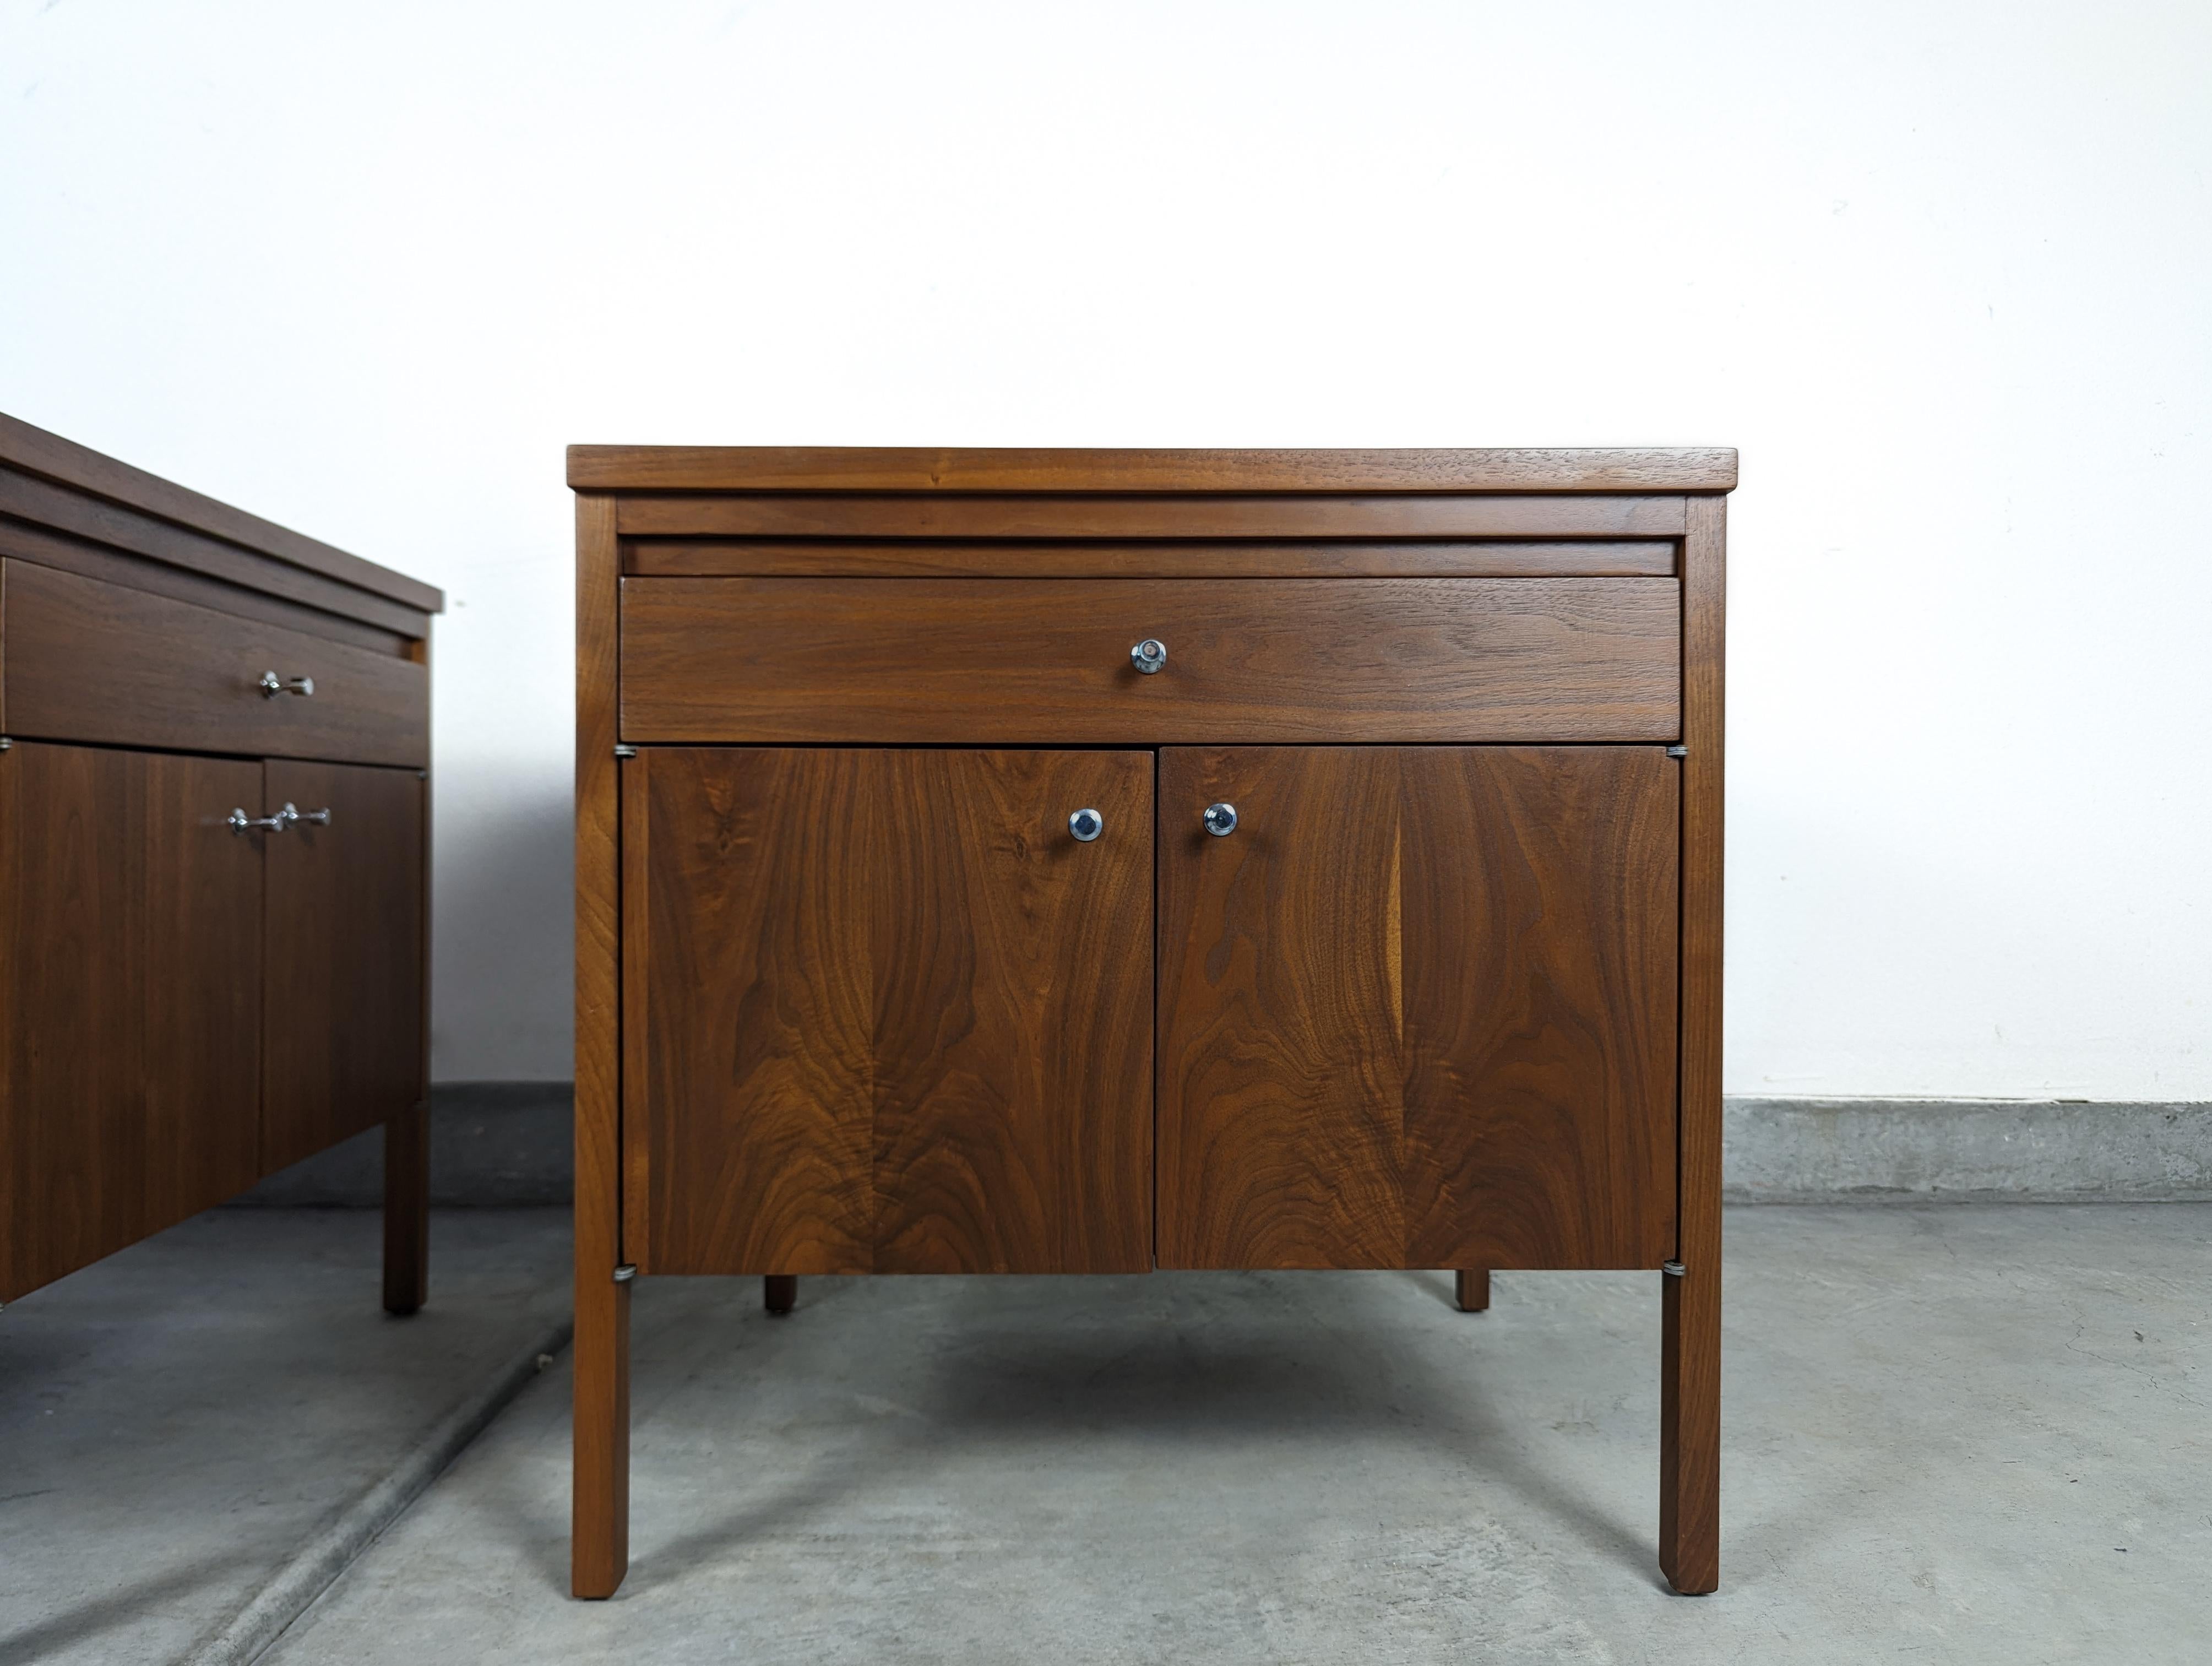 Pair of Mid Century Modern Delineator Nightstands by Paul McCobb for Lane, c1960 For Sale 7